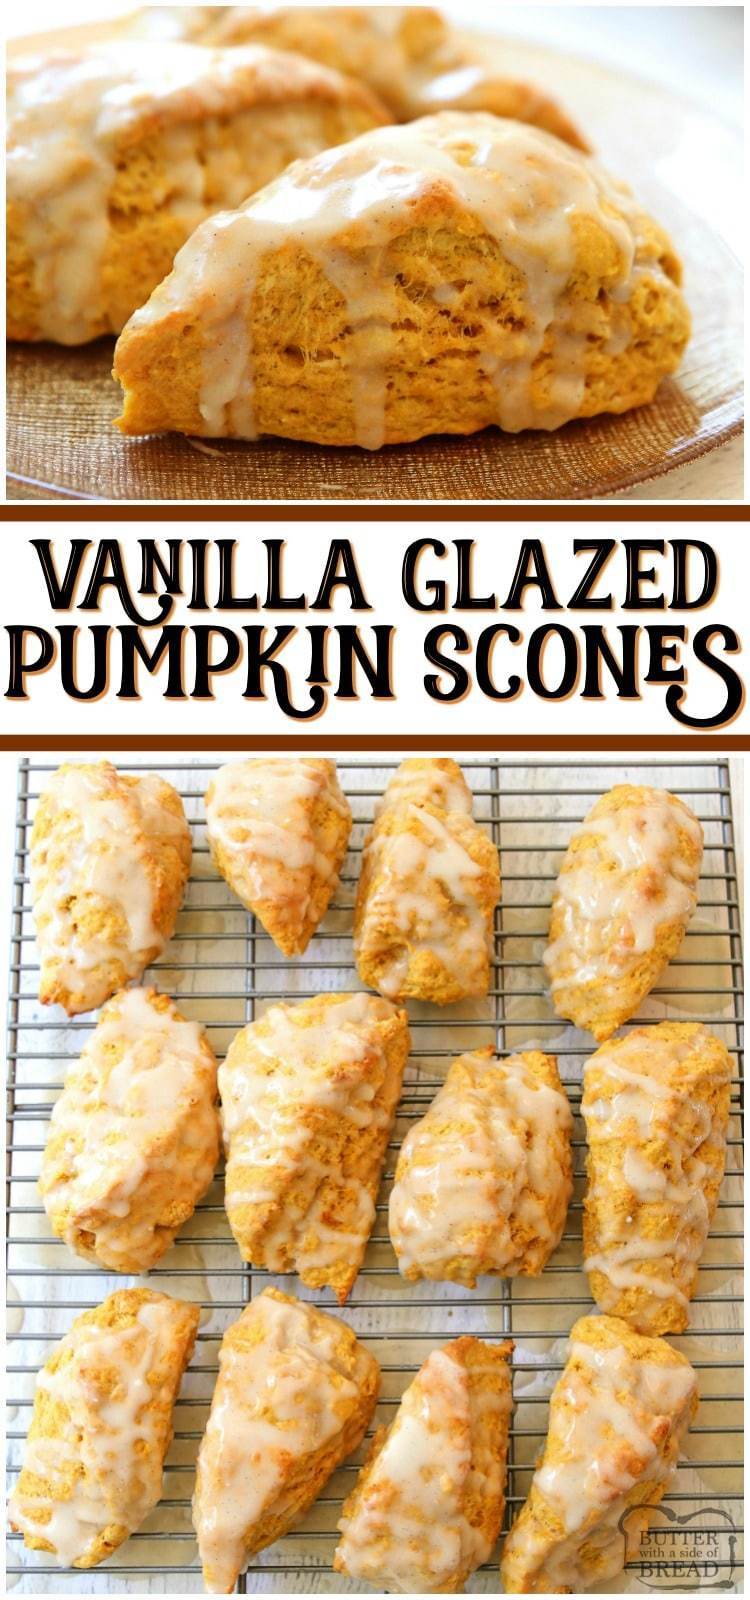 Easy Pumpkin Scones recipe made with pumpkin, cinnamon, brown sugar and butter. Soft & sweet pumpkin scones that are perfect for Fall. #scones #pumpkin #recipe #baking #breakfast #scone #recipe from BUTTER WITH A SIDE OF BREAD